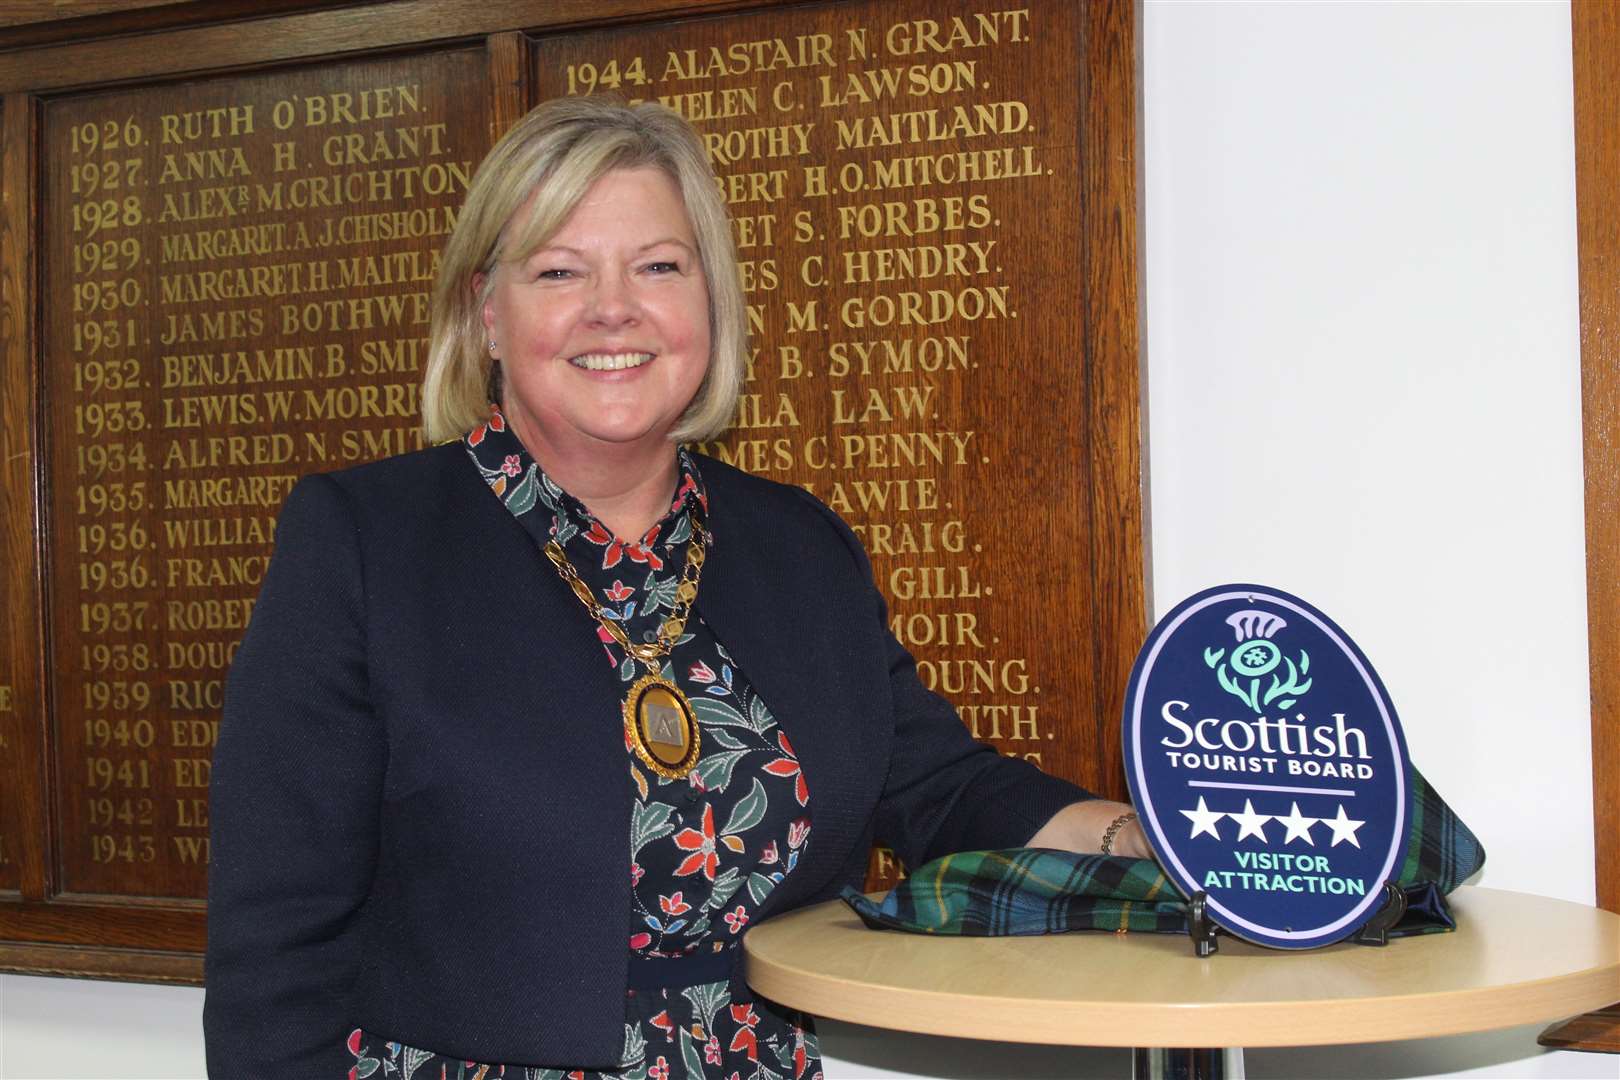 Provost Judy Whyte unveiled the Scottish tourist board 4 star visitor attraction plaque at Wednesday's meeting in Garioch Heritage centre, Loco works road, Inverurie. Picture: Griselda McGregor